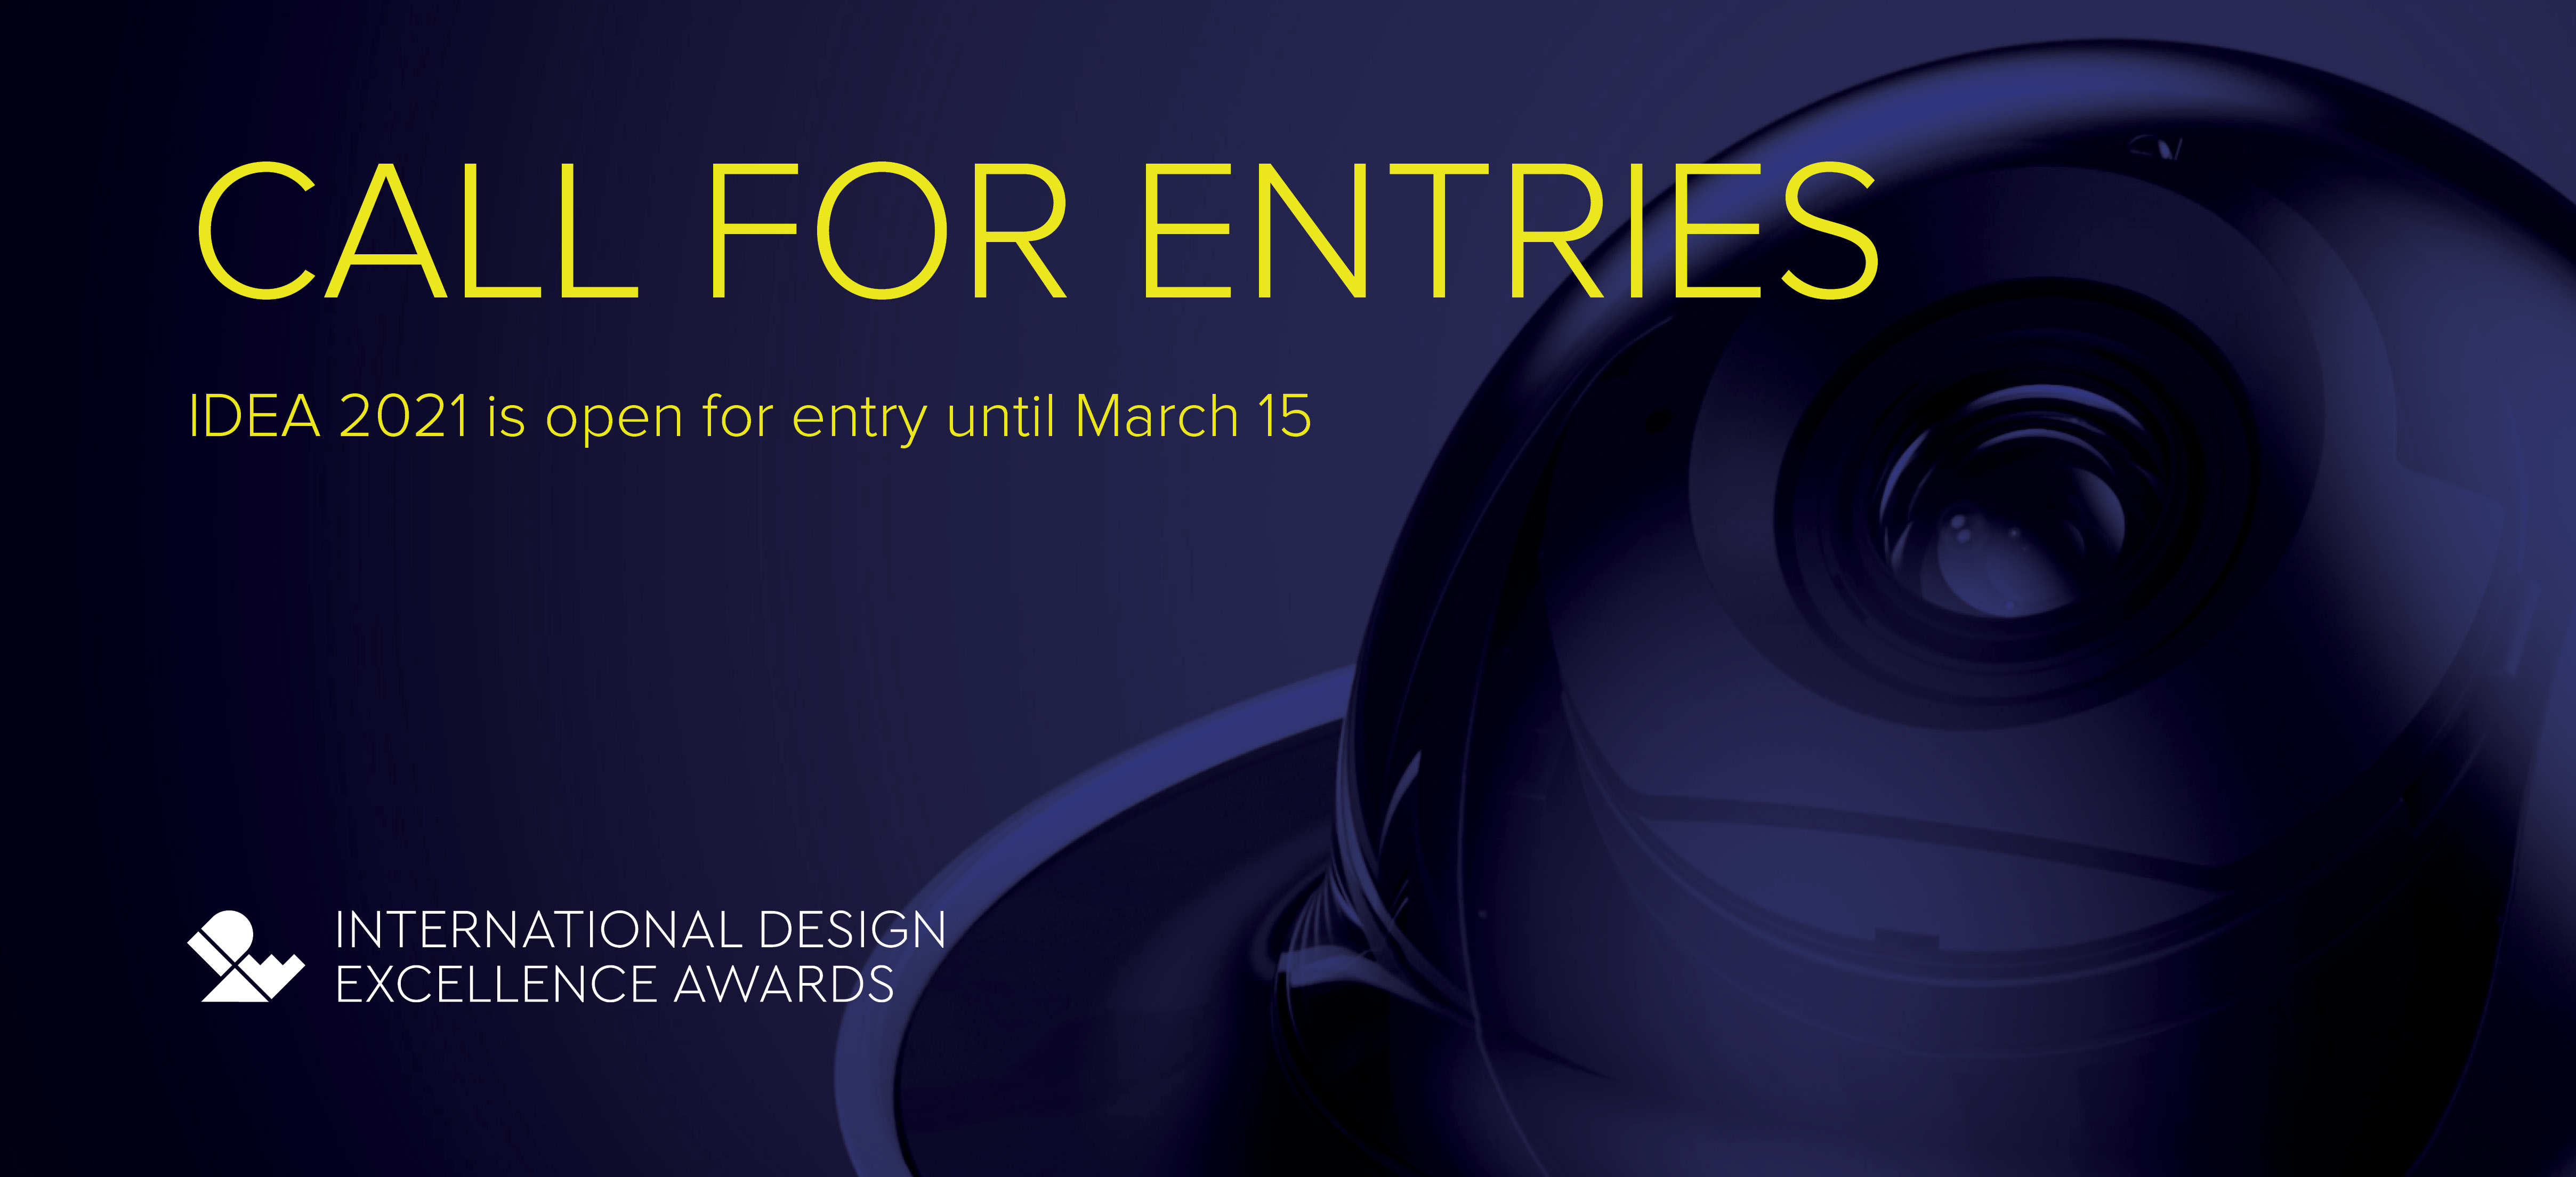 International Design Excellence Awards (IDEA)® 2021 Is Open for Entry